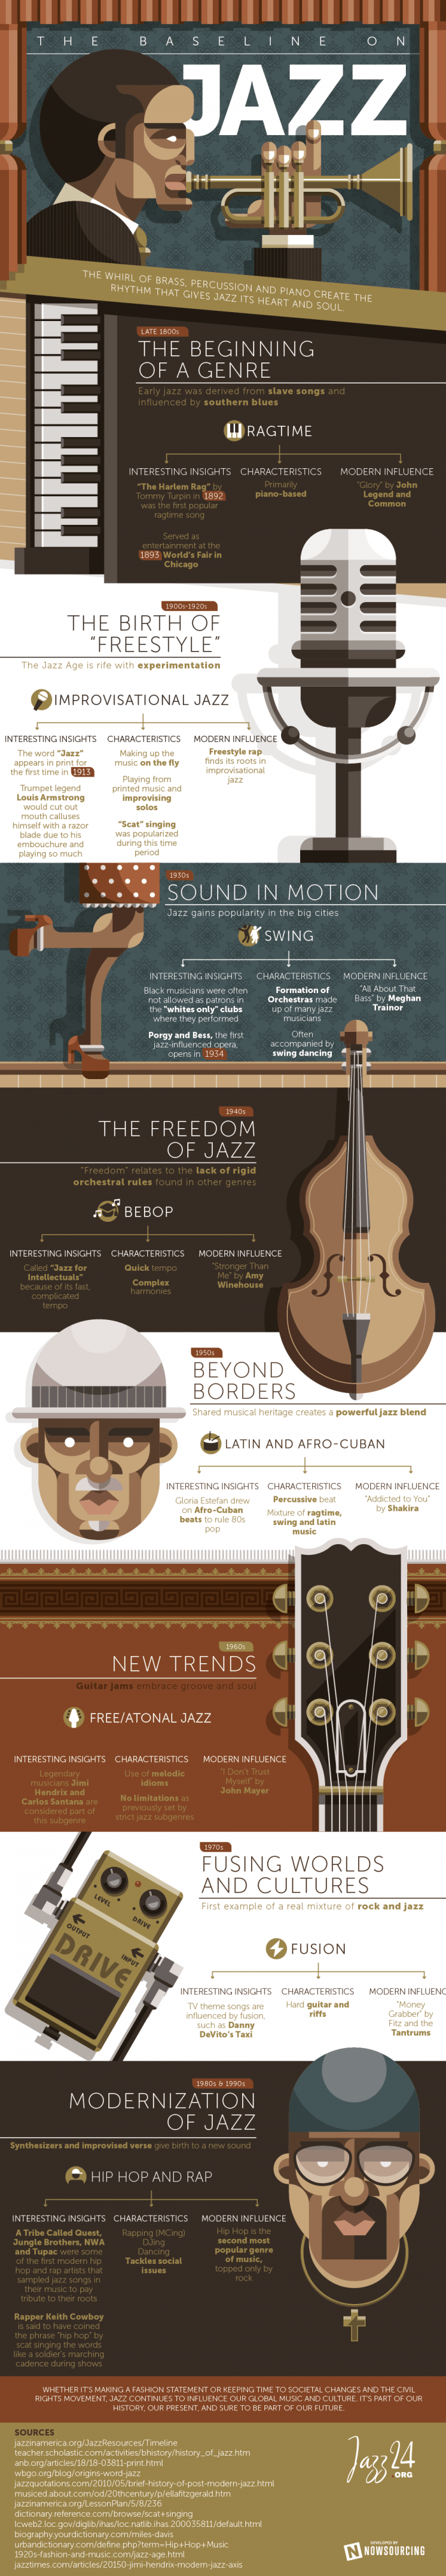 Picture shows the history of jazz and its subgenres.